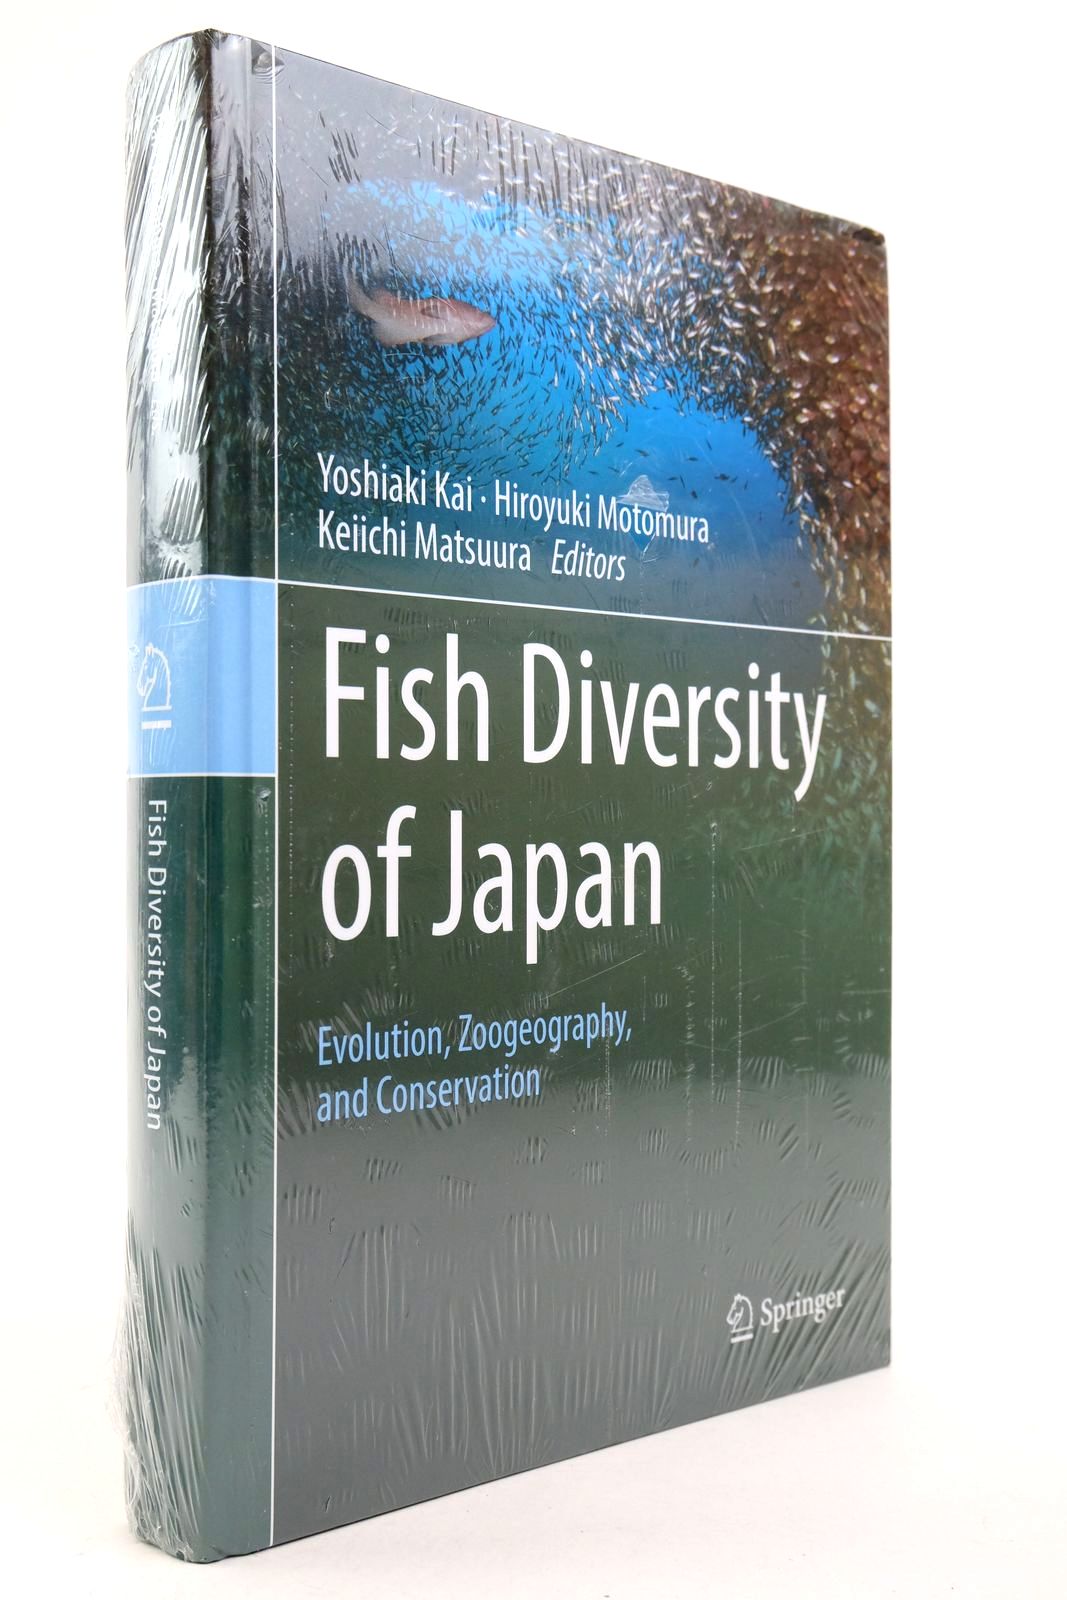 Photo of FISH DIVERSITY OF JAPAN: EVOLUTION, ZOOGEOGRAPHY, AND CONSERVATION written by Kai, Yoshiaki Motomura, Hiroyuki Matsuura, Keiichi published by Springer (STOCK CODE: 2140432)  for sale by Stella & Rose's Books